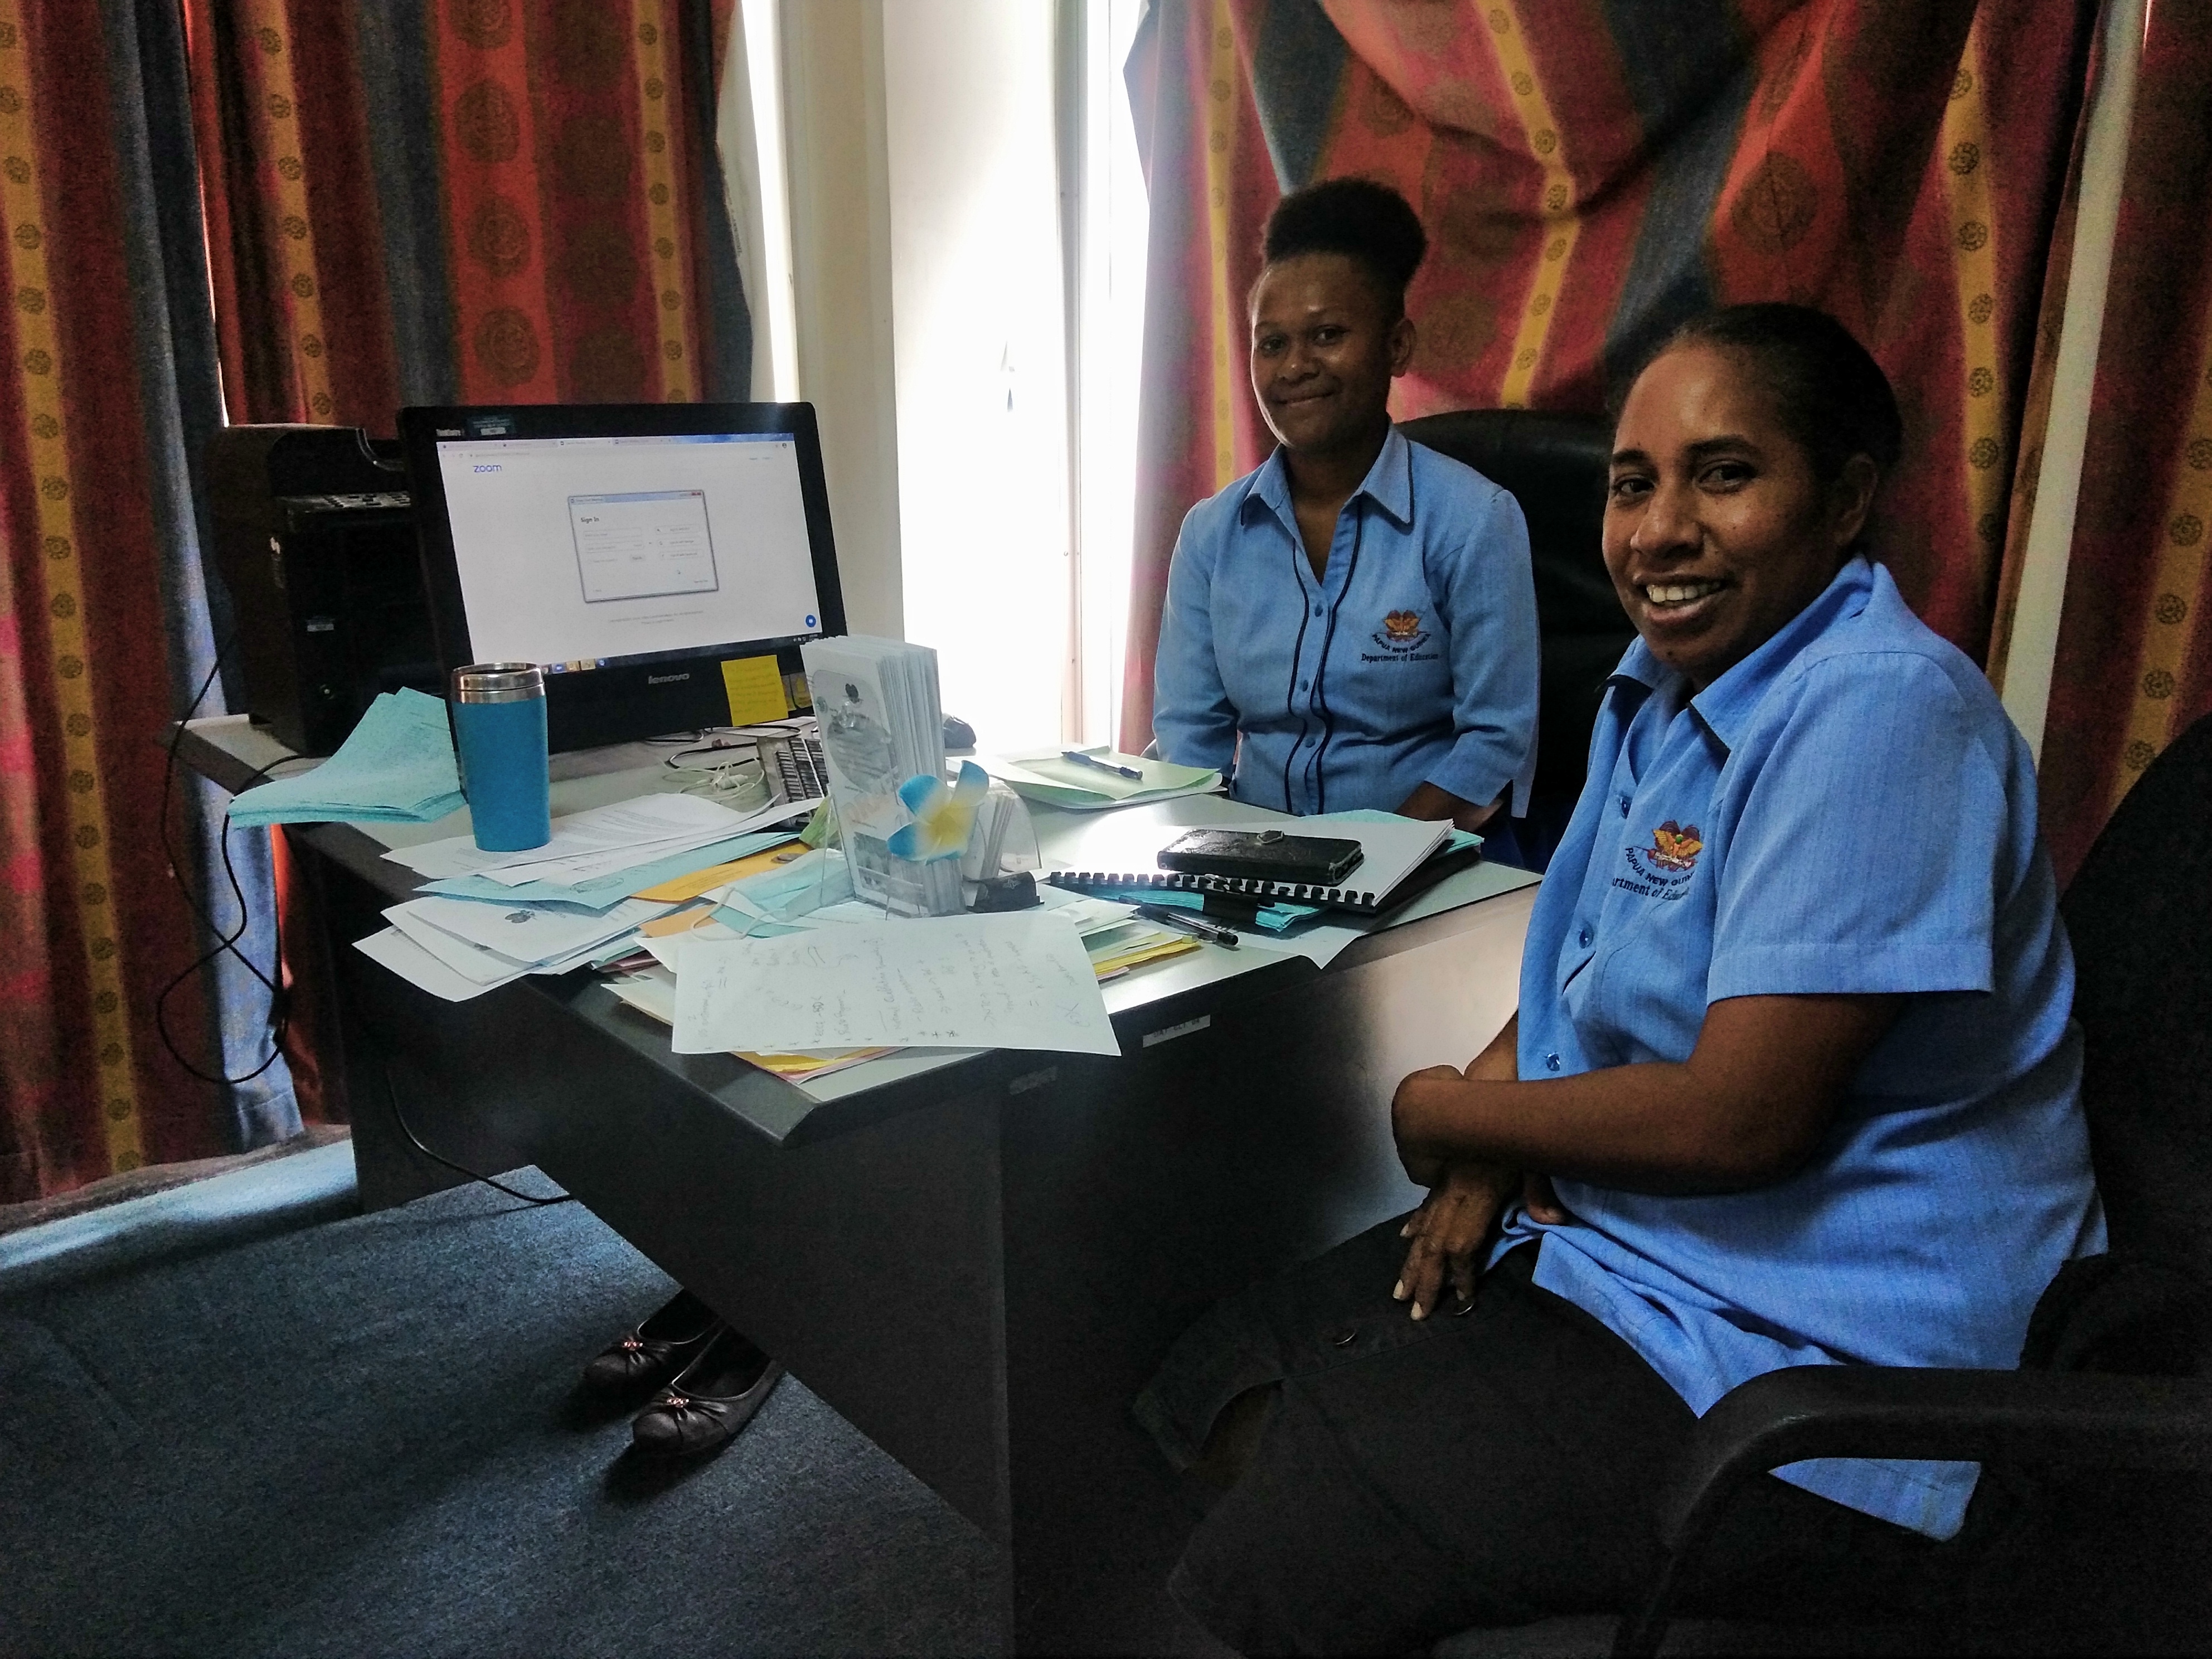 PNG's education statisticians who were part of a recent EQAP training on education data. PC: Supplied